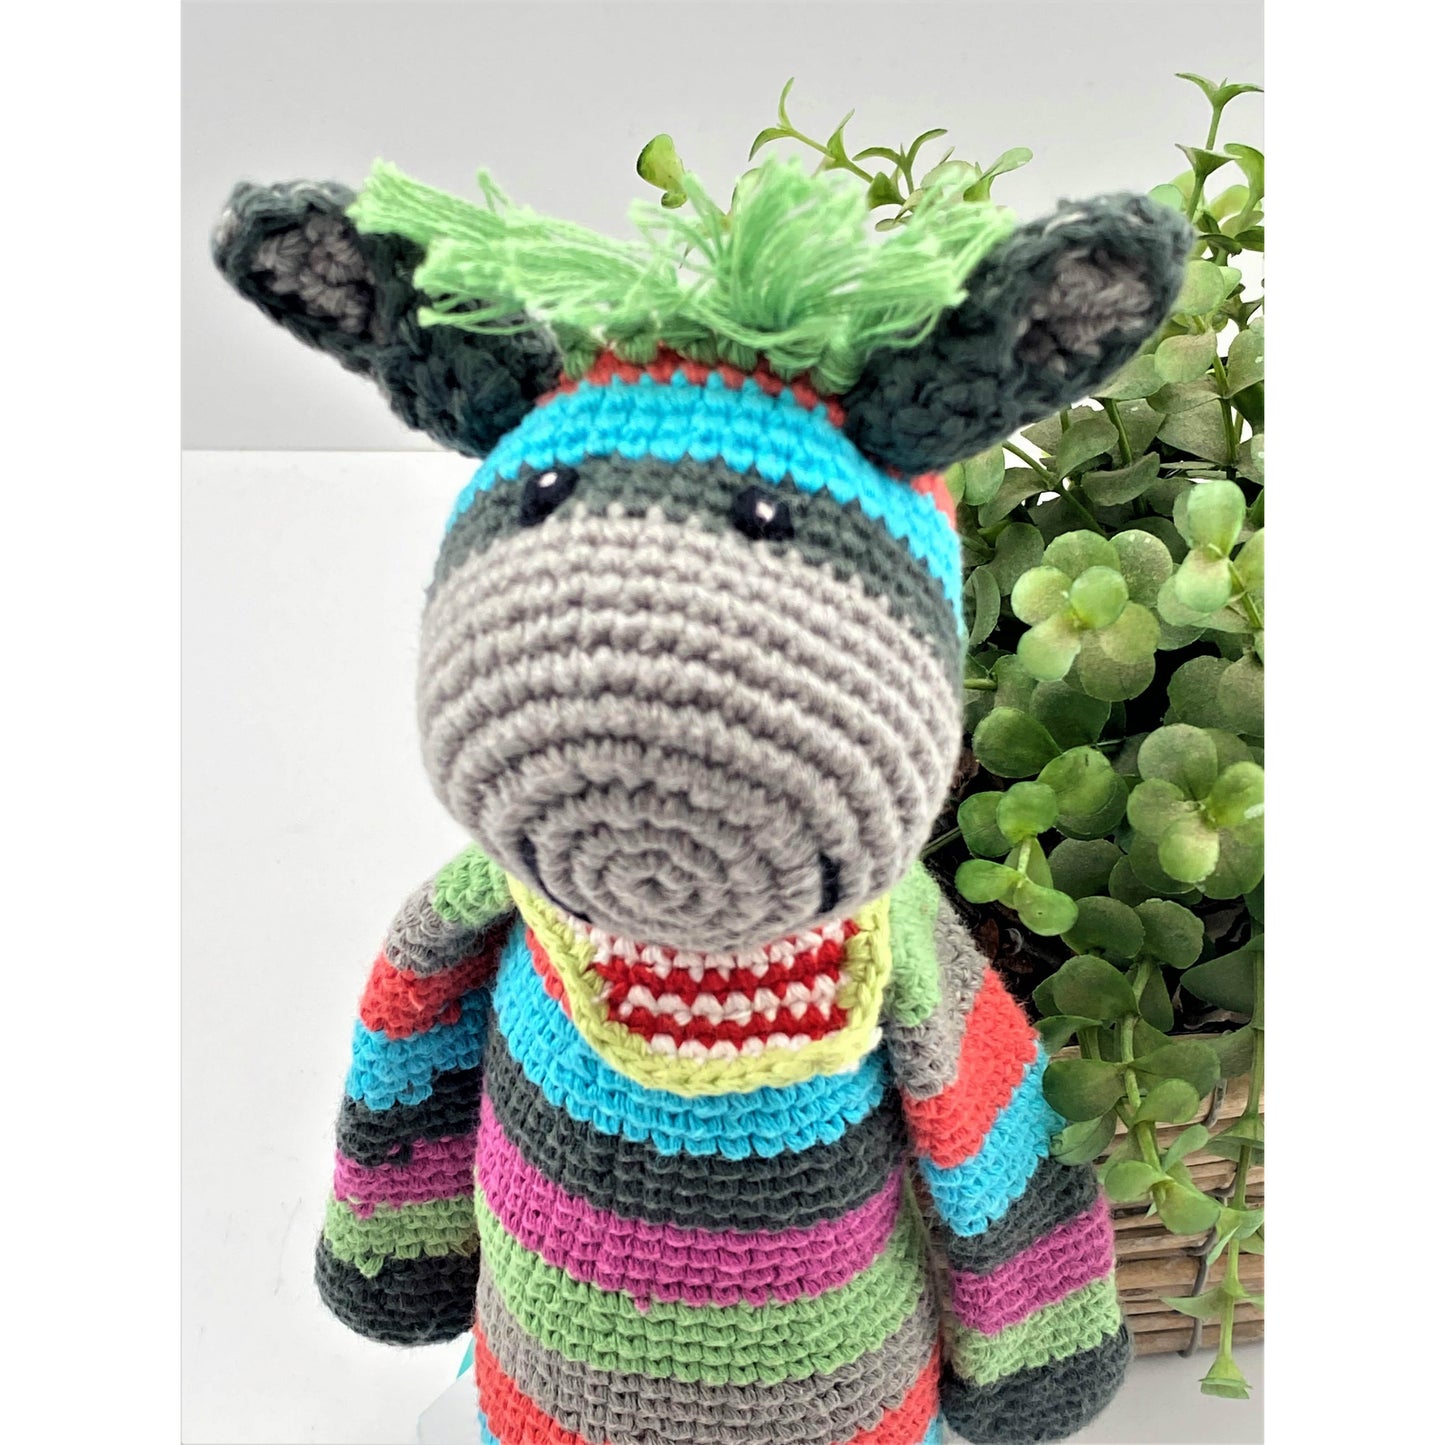 Baby Rattles, Gifts For Babies, Baby Shower Present, Baby's First Birthday, New Mum Gift, Hand Knitted Rainbow Donkey Baby Toy